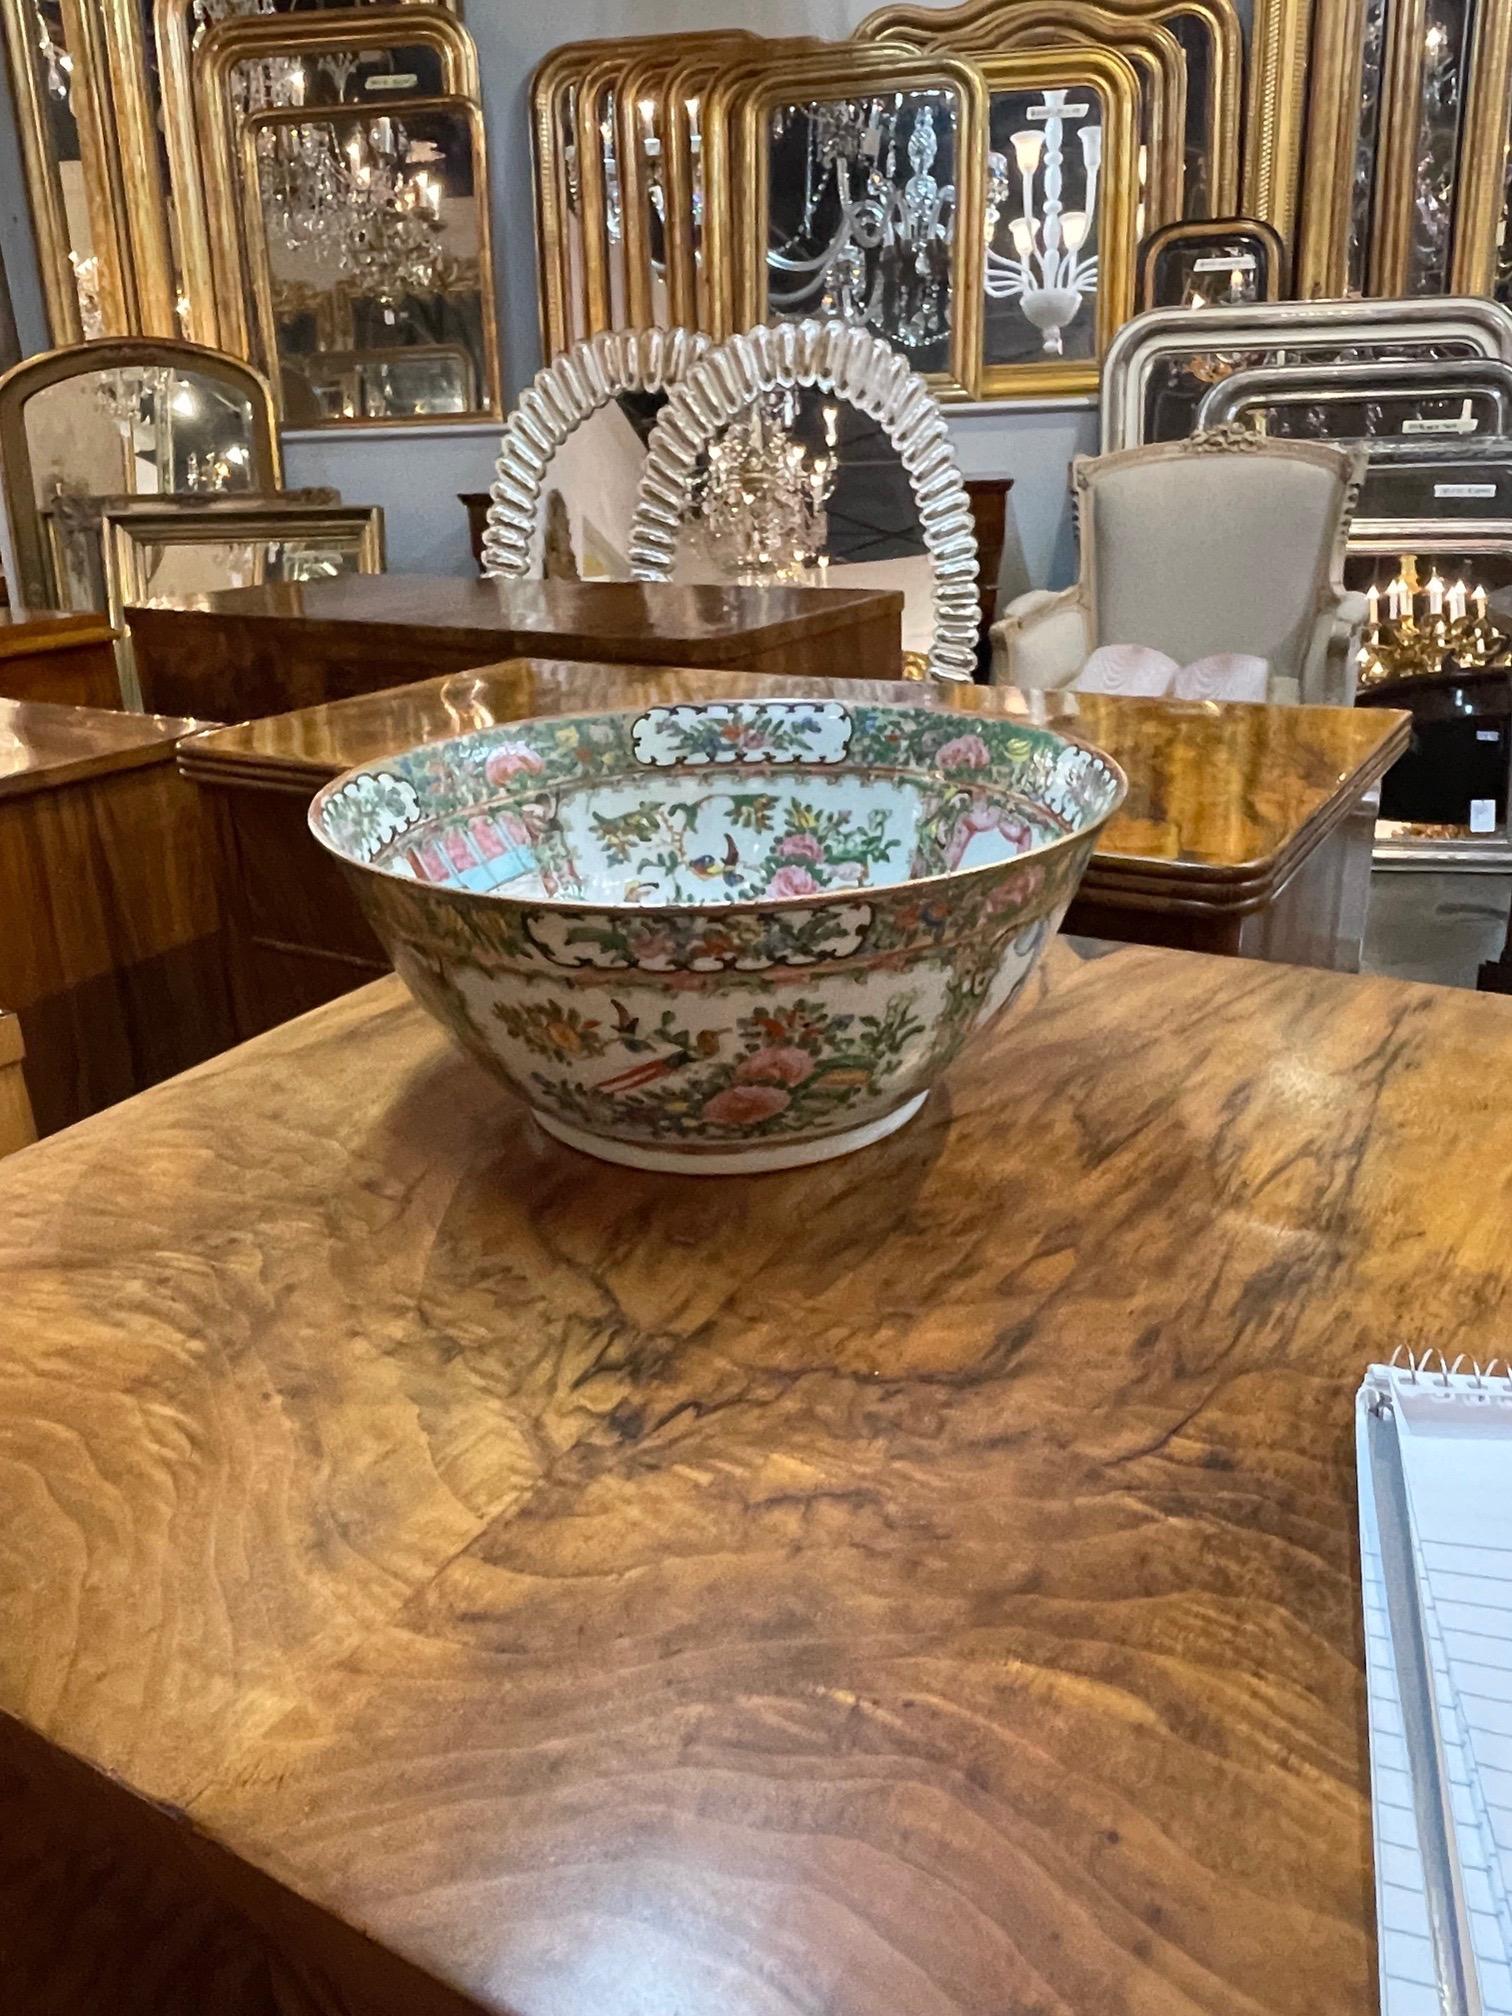 Beautiful 19th century Chinese Rose Medallion punch bowl. Really pretty Asian designs in the colors of blue, pink, green and orange. Just lovely!!